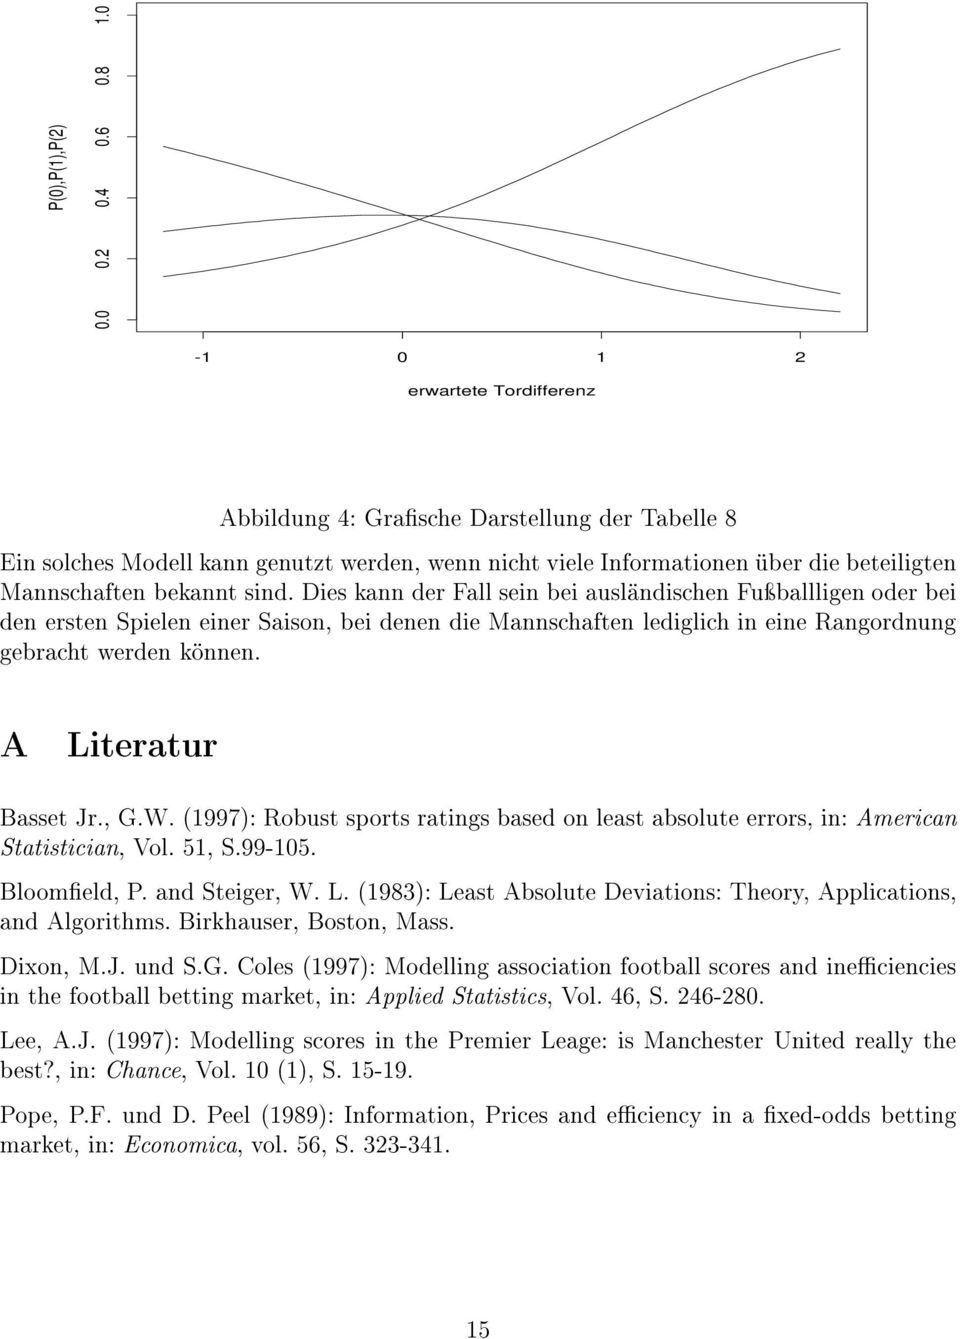 gebracht werden können A Literatur Basset Jr, GW (1997): Robust sports ratings based on least absolute errors, in: American Statistician, Vol 51, S99-105 Bloomeld, P and Steiger, W L (1983): Least